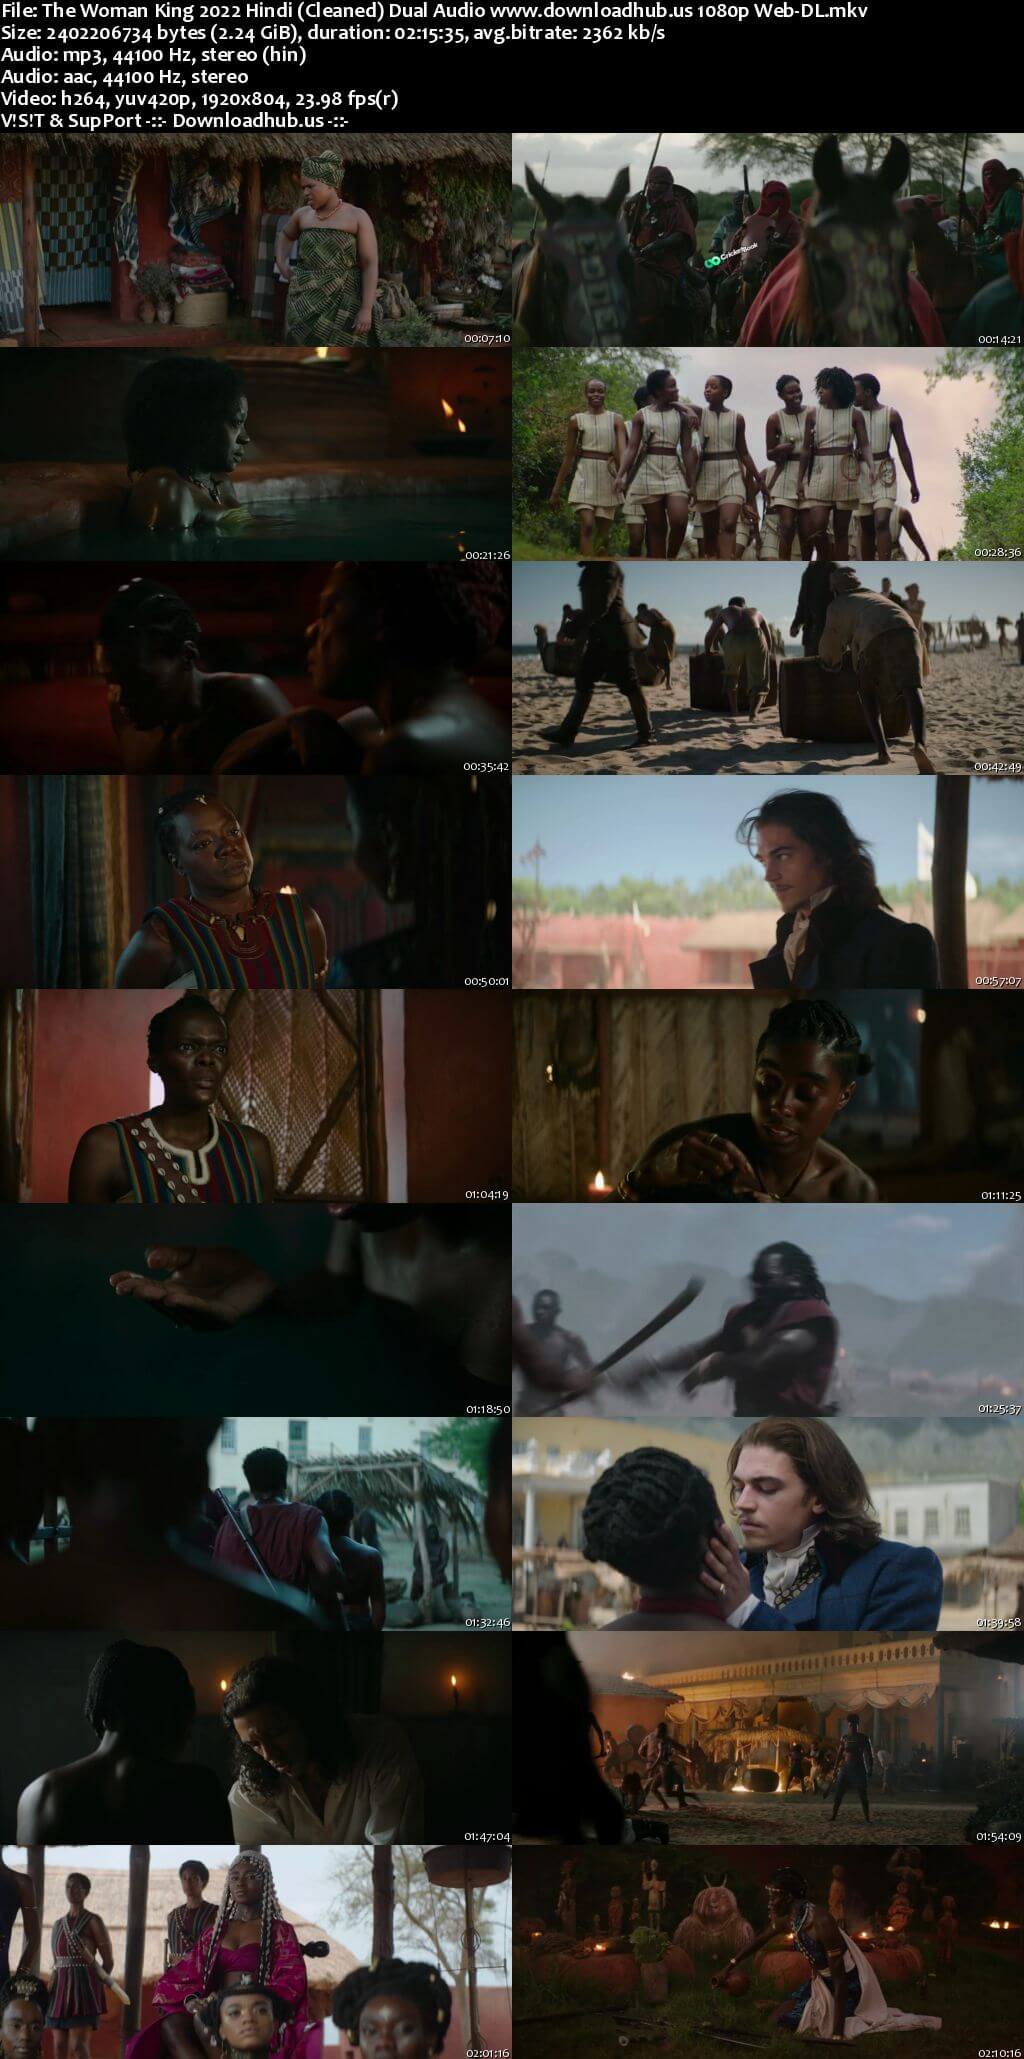 The Woman King 2022 Hindi (Cleaned) Dual Audio 1080p 720p 480p Web-DL HEVC